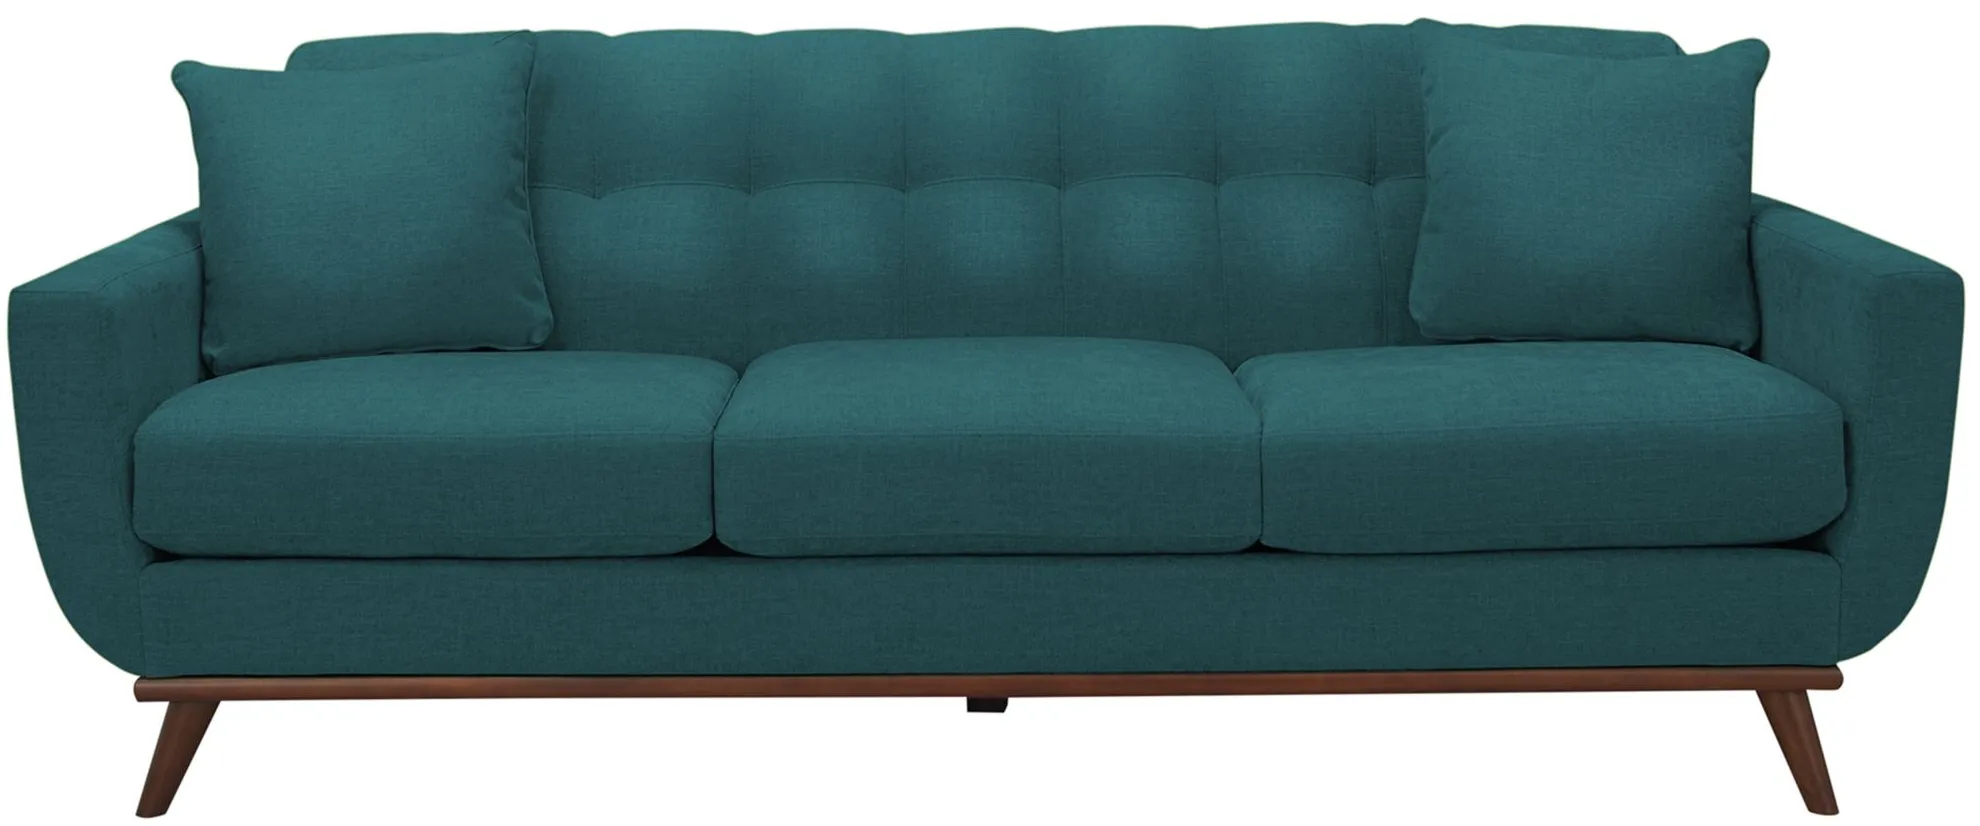 Milo Sofa in Elliot Teal by H.M. Richards